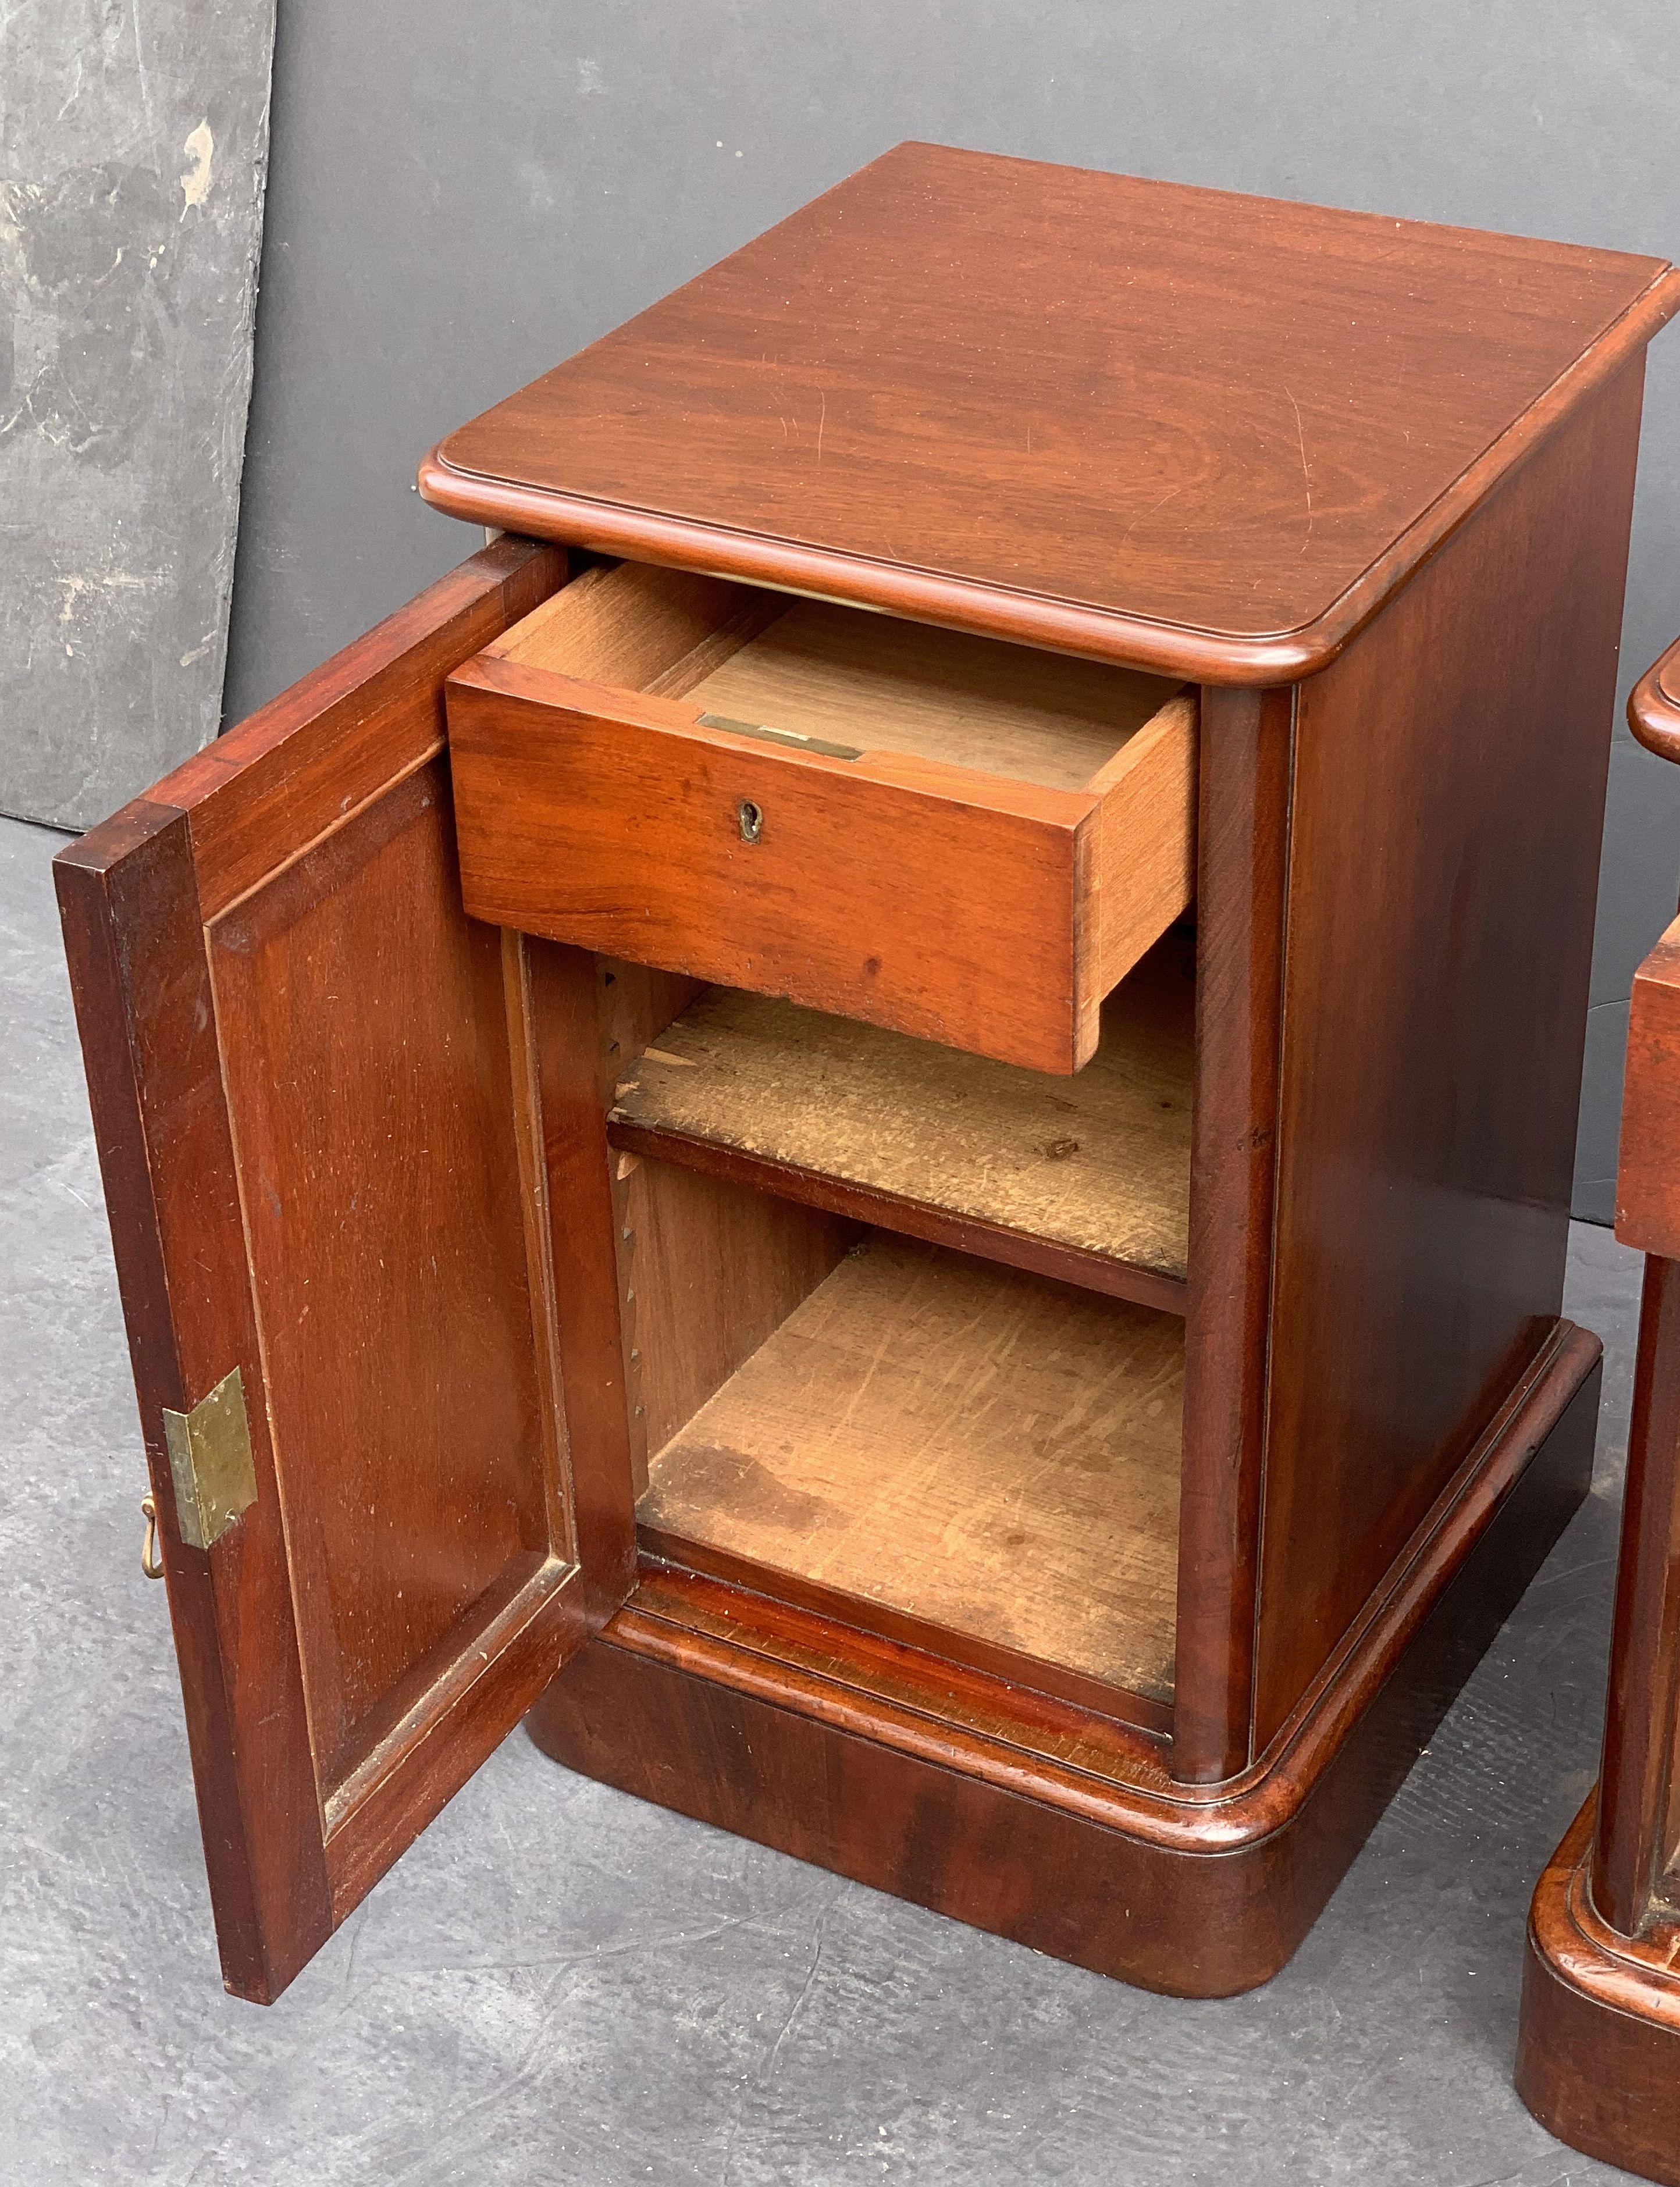 English Bedside Chests or Cabinet Nightstands of Mahogany, Priced as a Pair 11